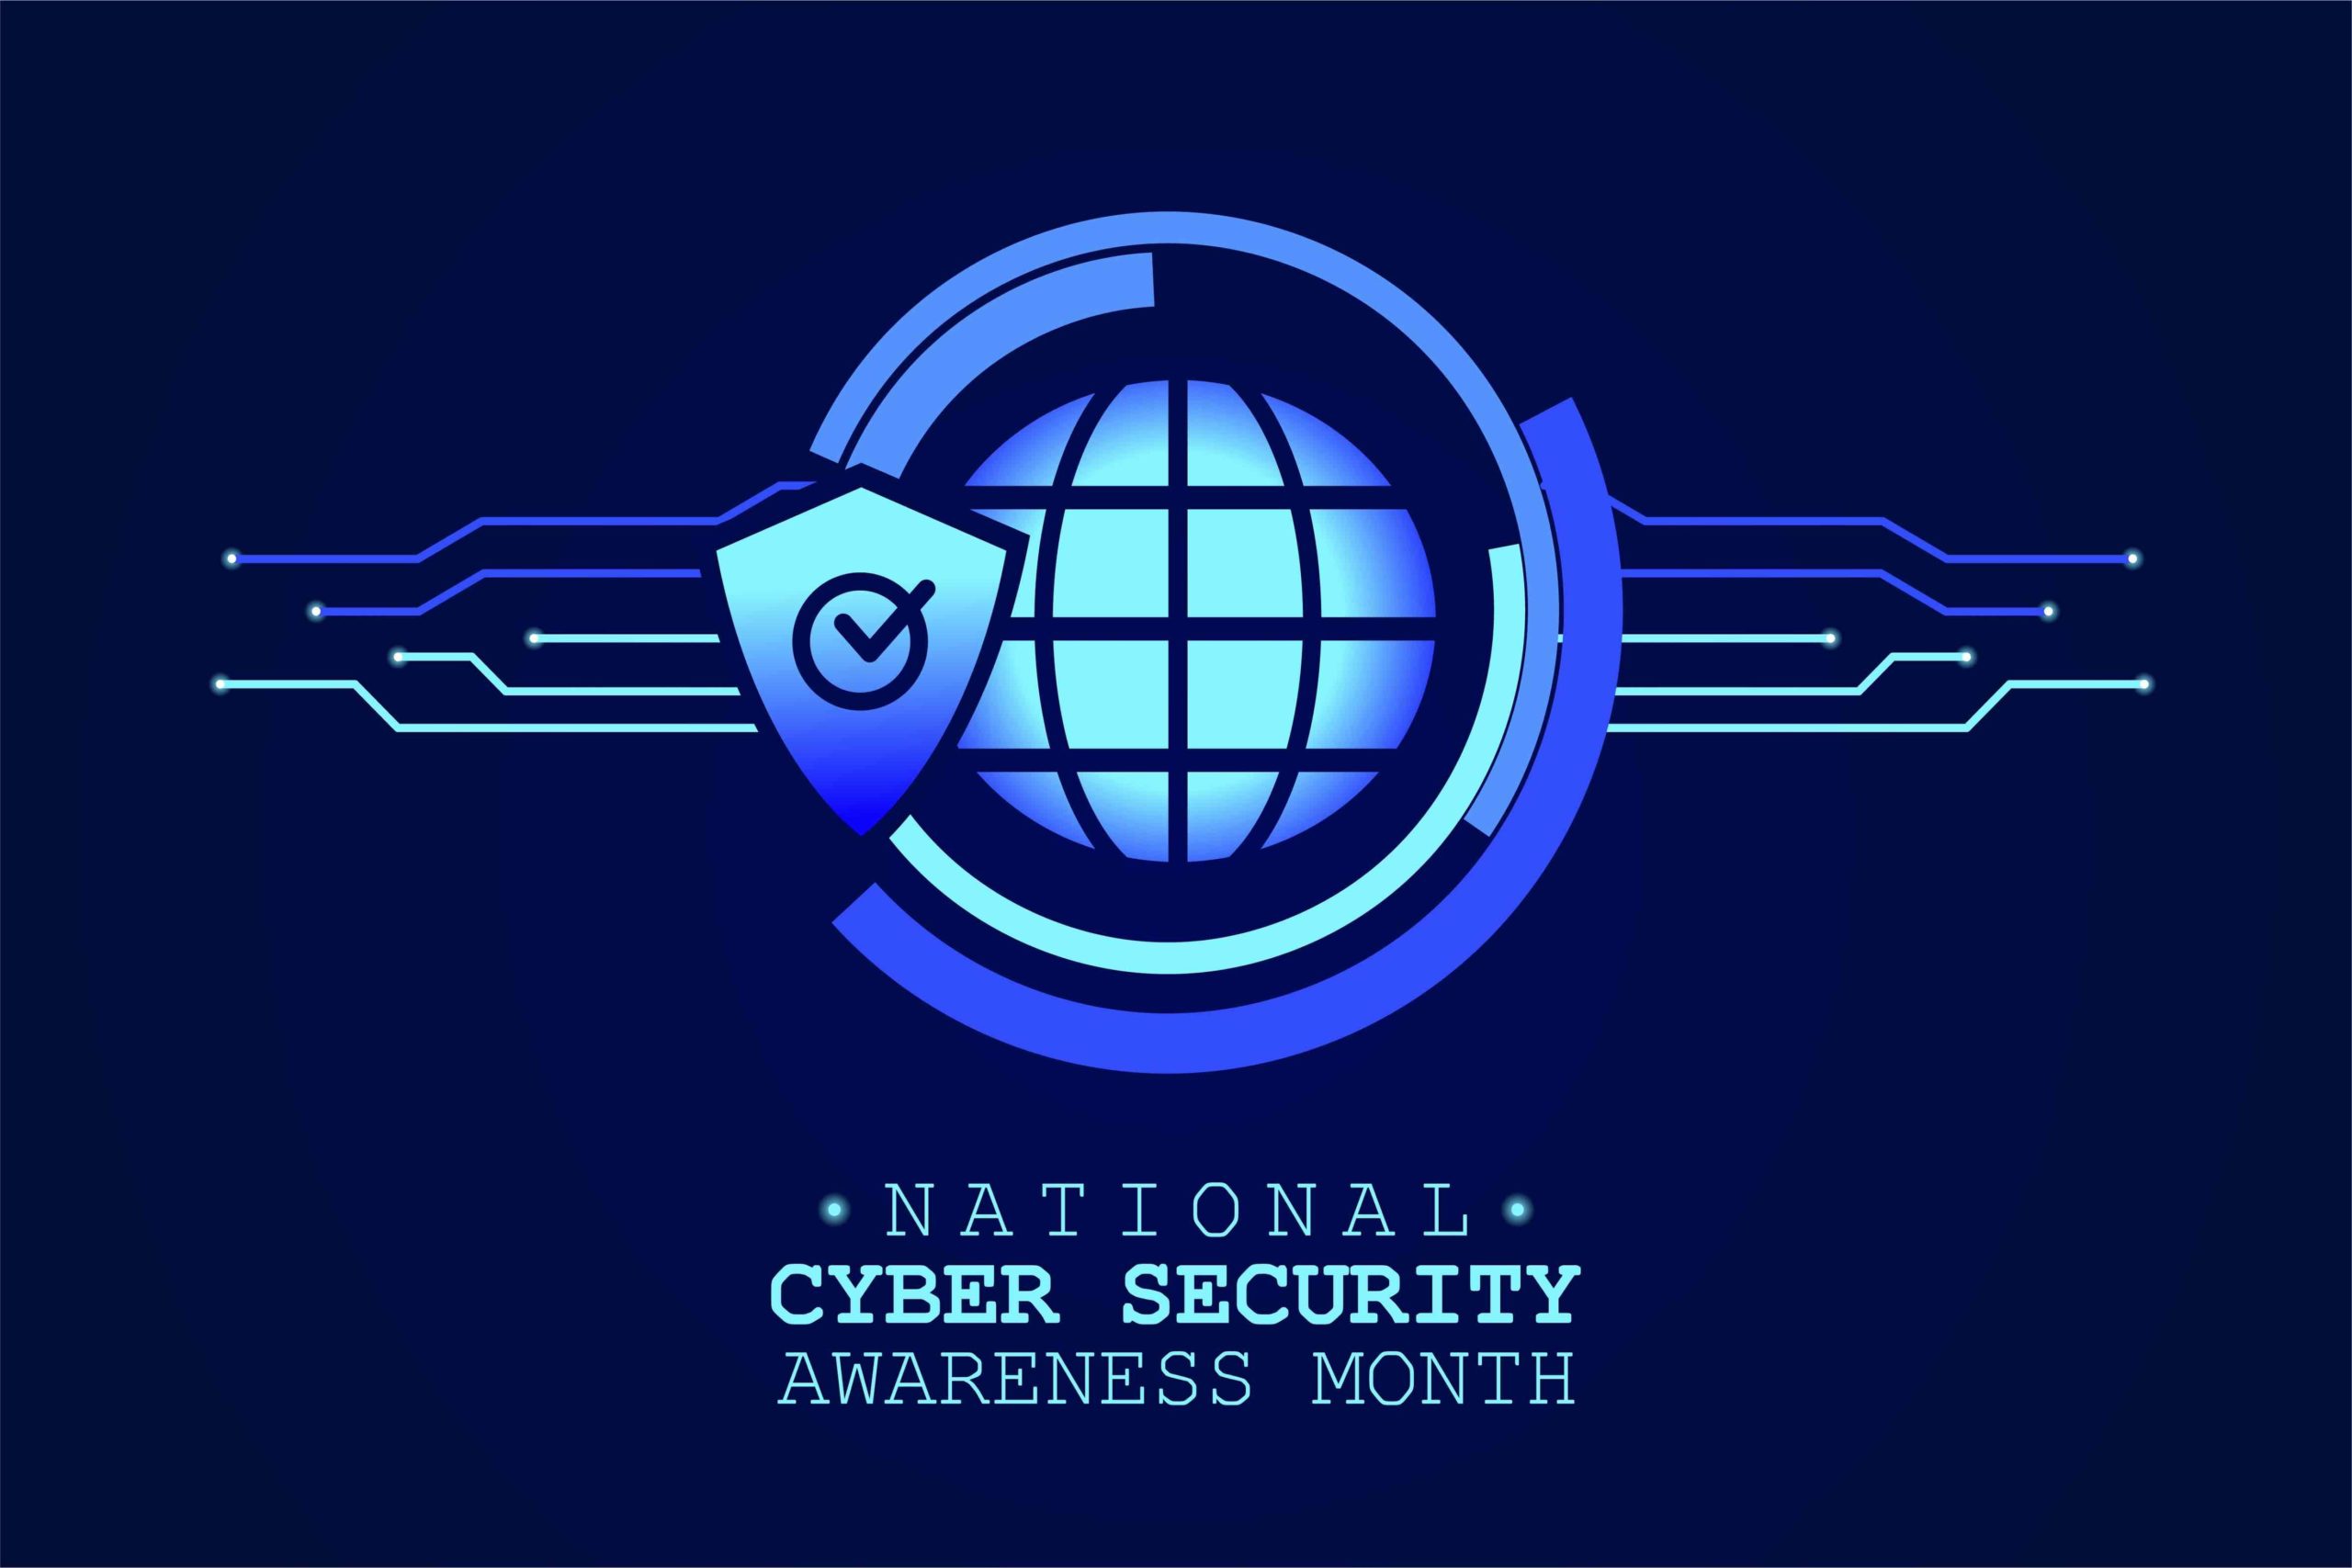 Step Up Your Cybersecurity Posture This Cybersecurity Awareness Month